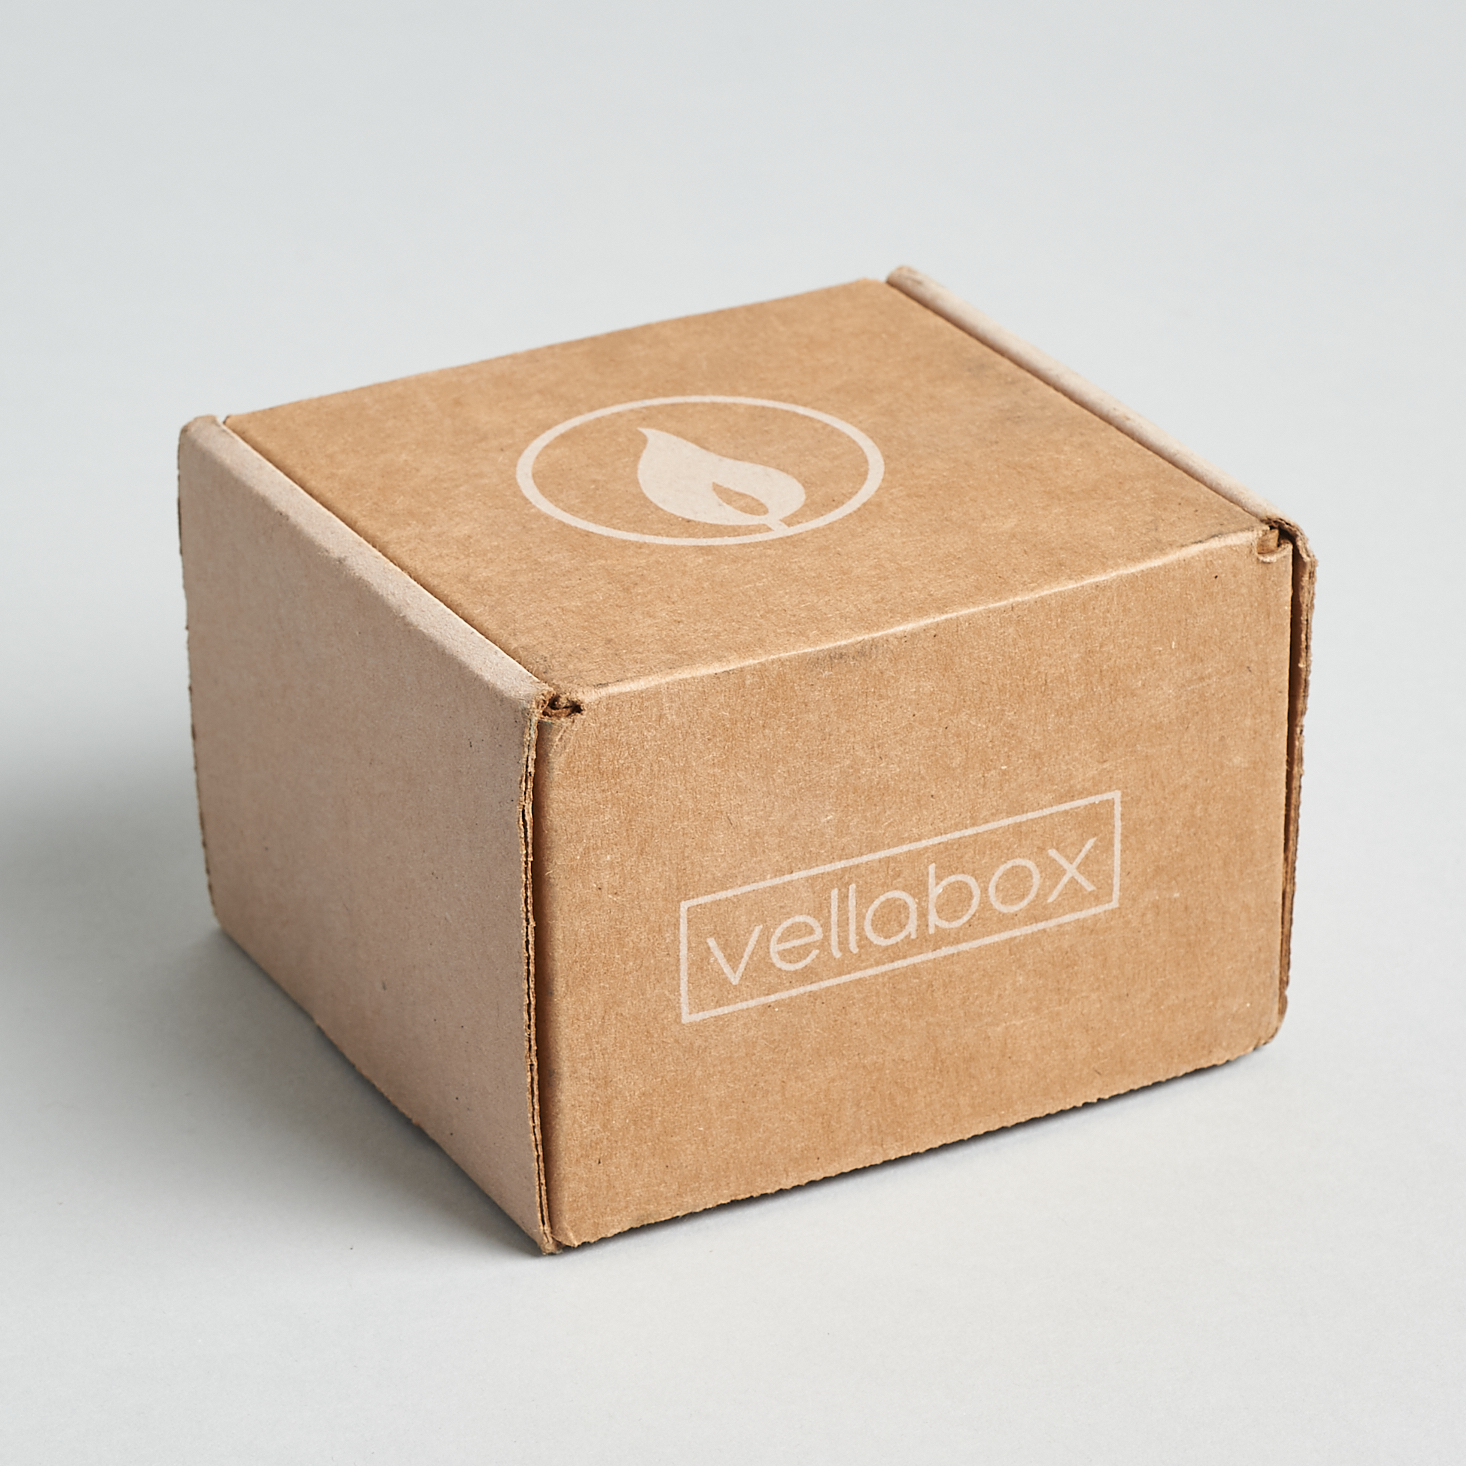 Vellabox Candle “Ignis” Review + Coupon – January 2021